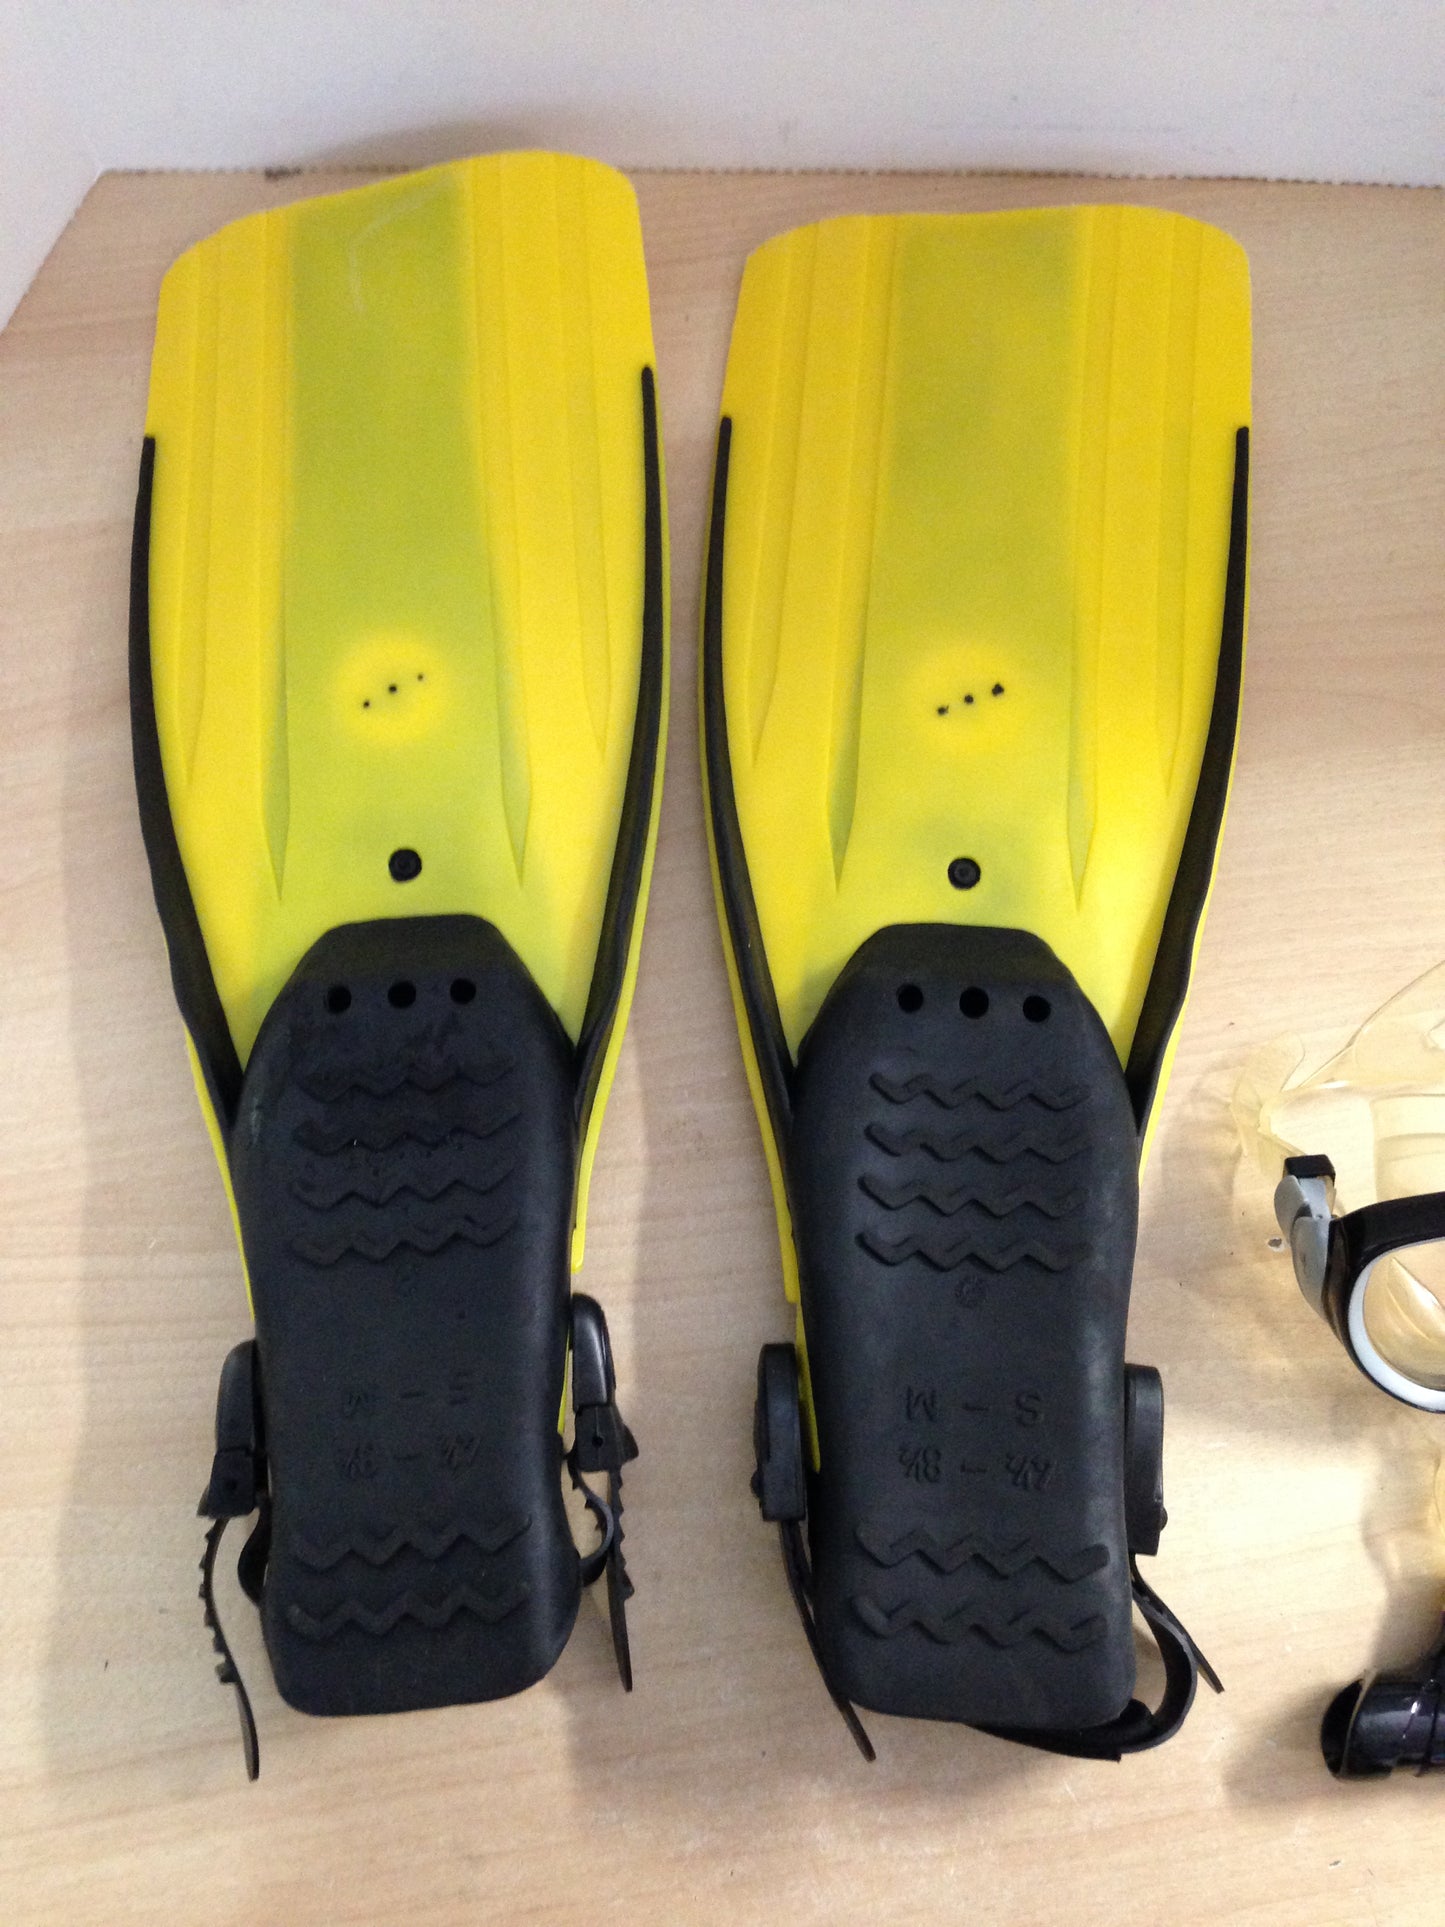 Snorkel Dive Fins Set Ladies Size 4-8.5 Shoe Aqua Lung Yellow and Black Padded Ankle Support Excellent